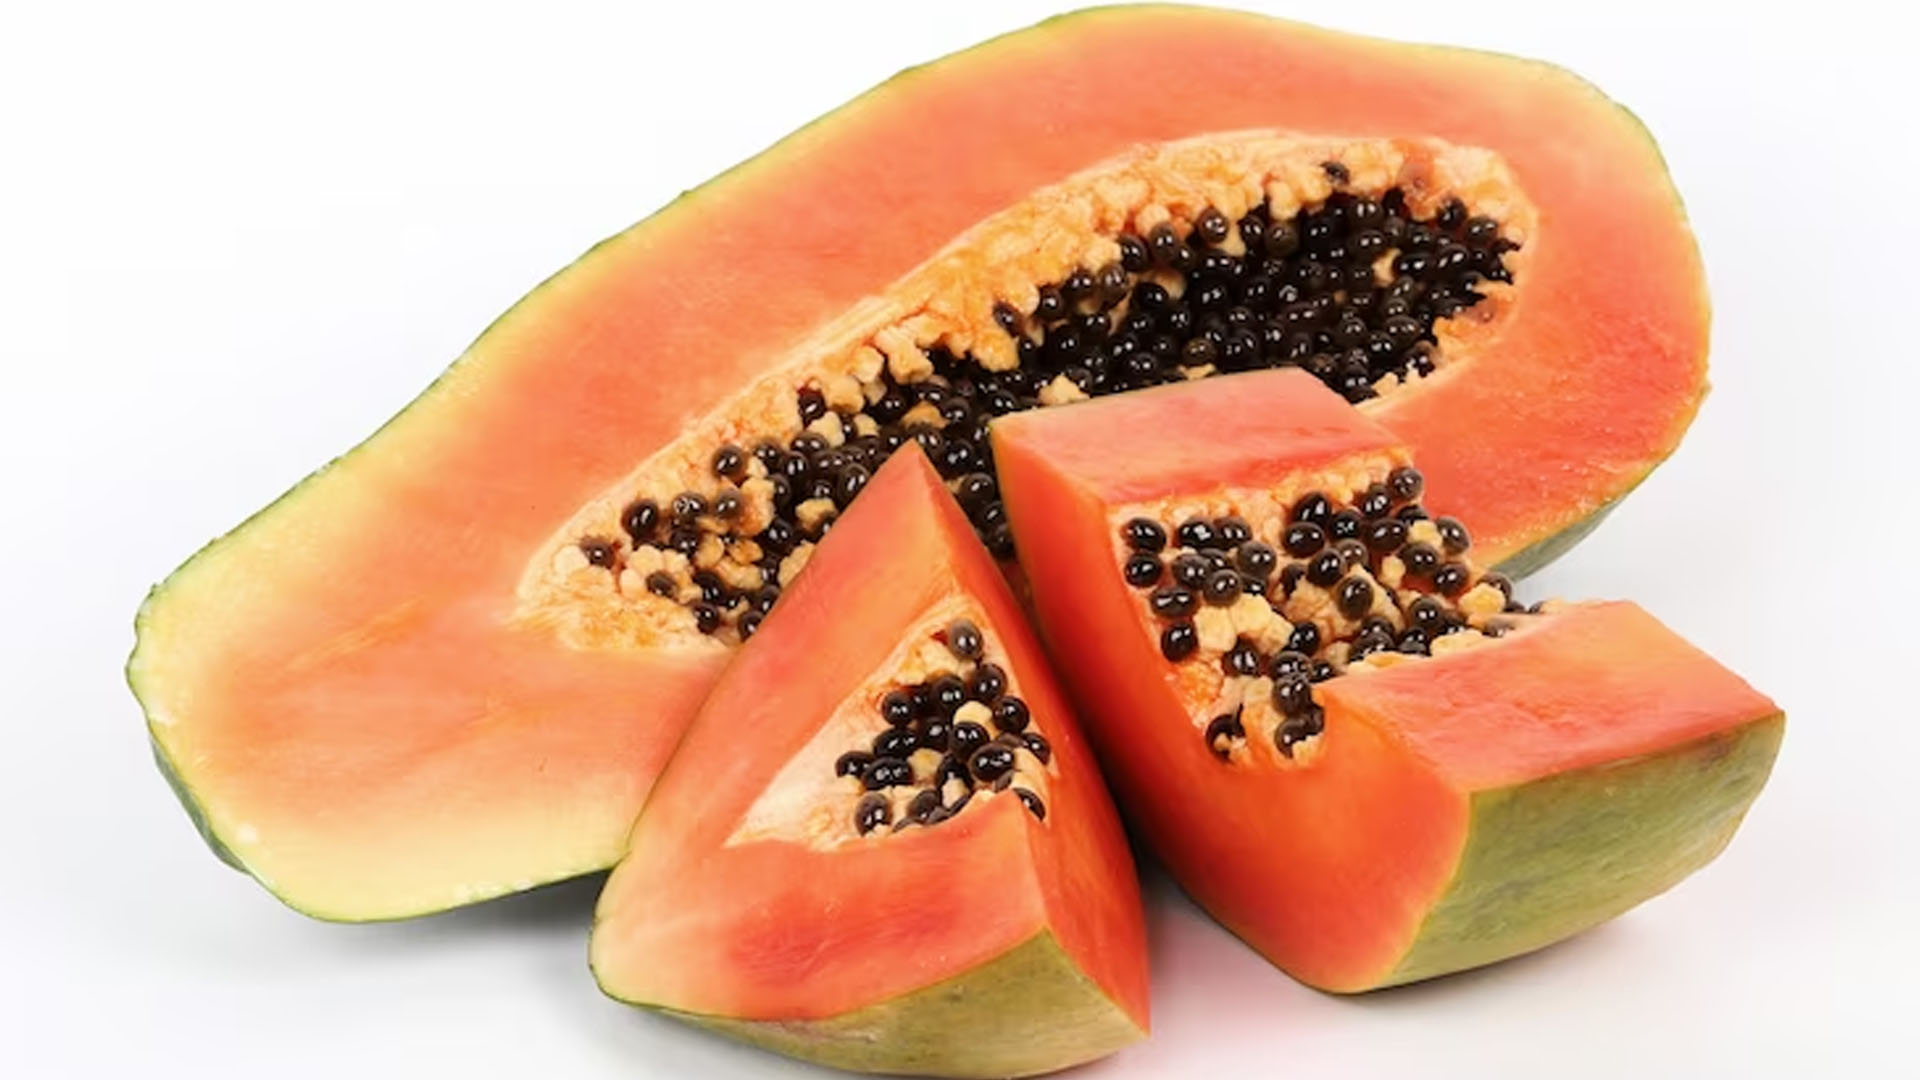 What Are Some Health Benefits Of Papaya Seeds?